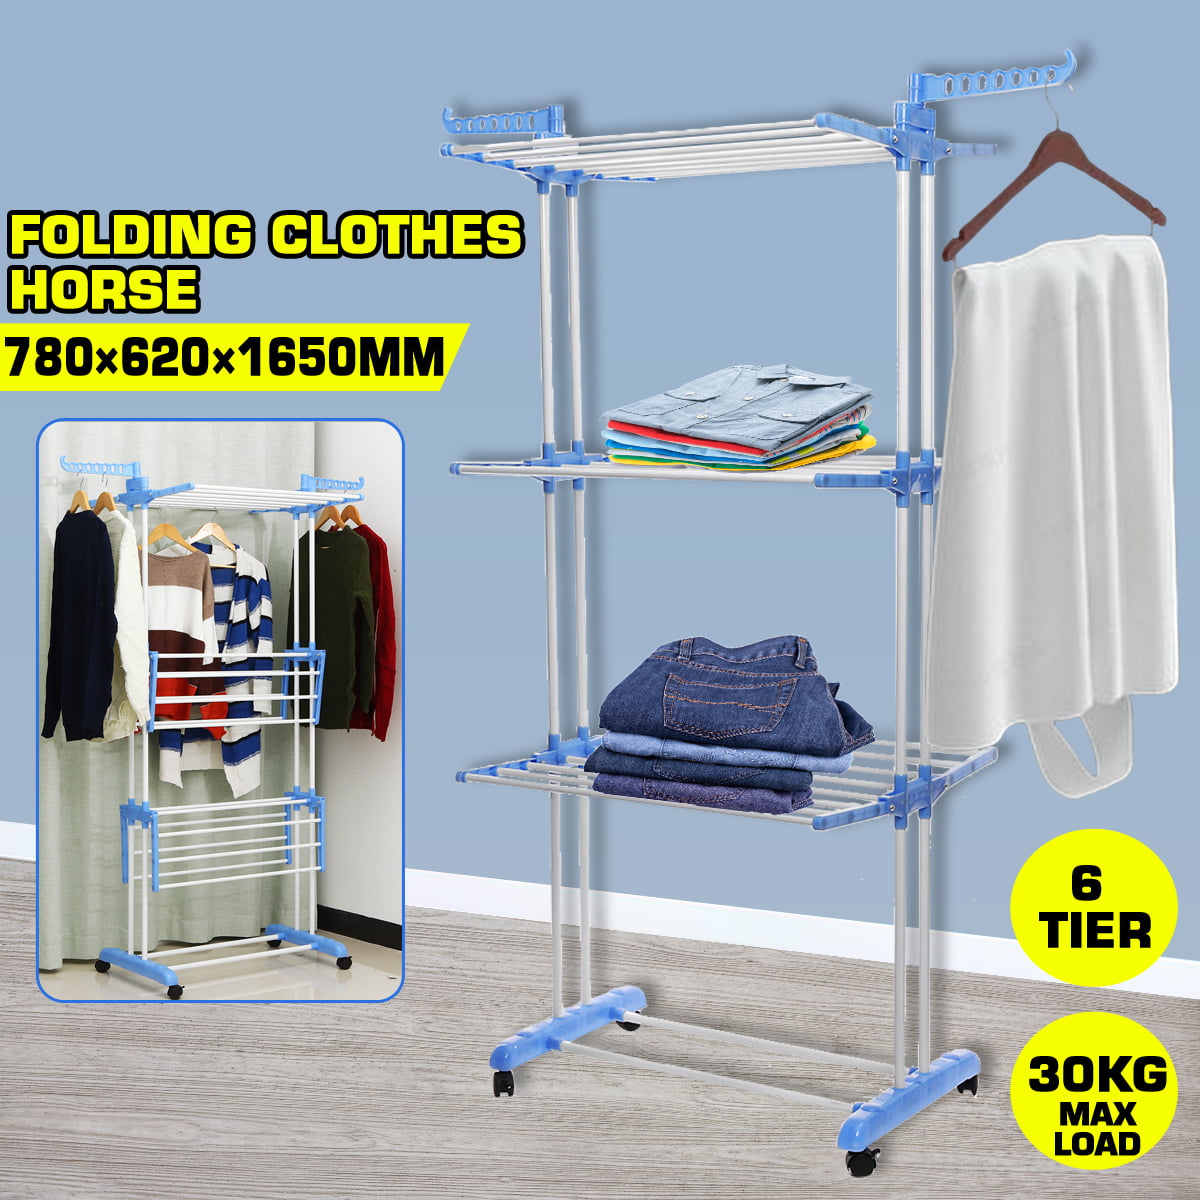 3 Tier Clothes Dryer Rack, Foldable Towel Laundry Drying Hanger Airer Compact Storage Steel